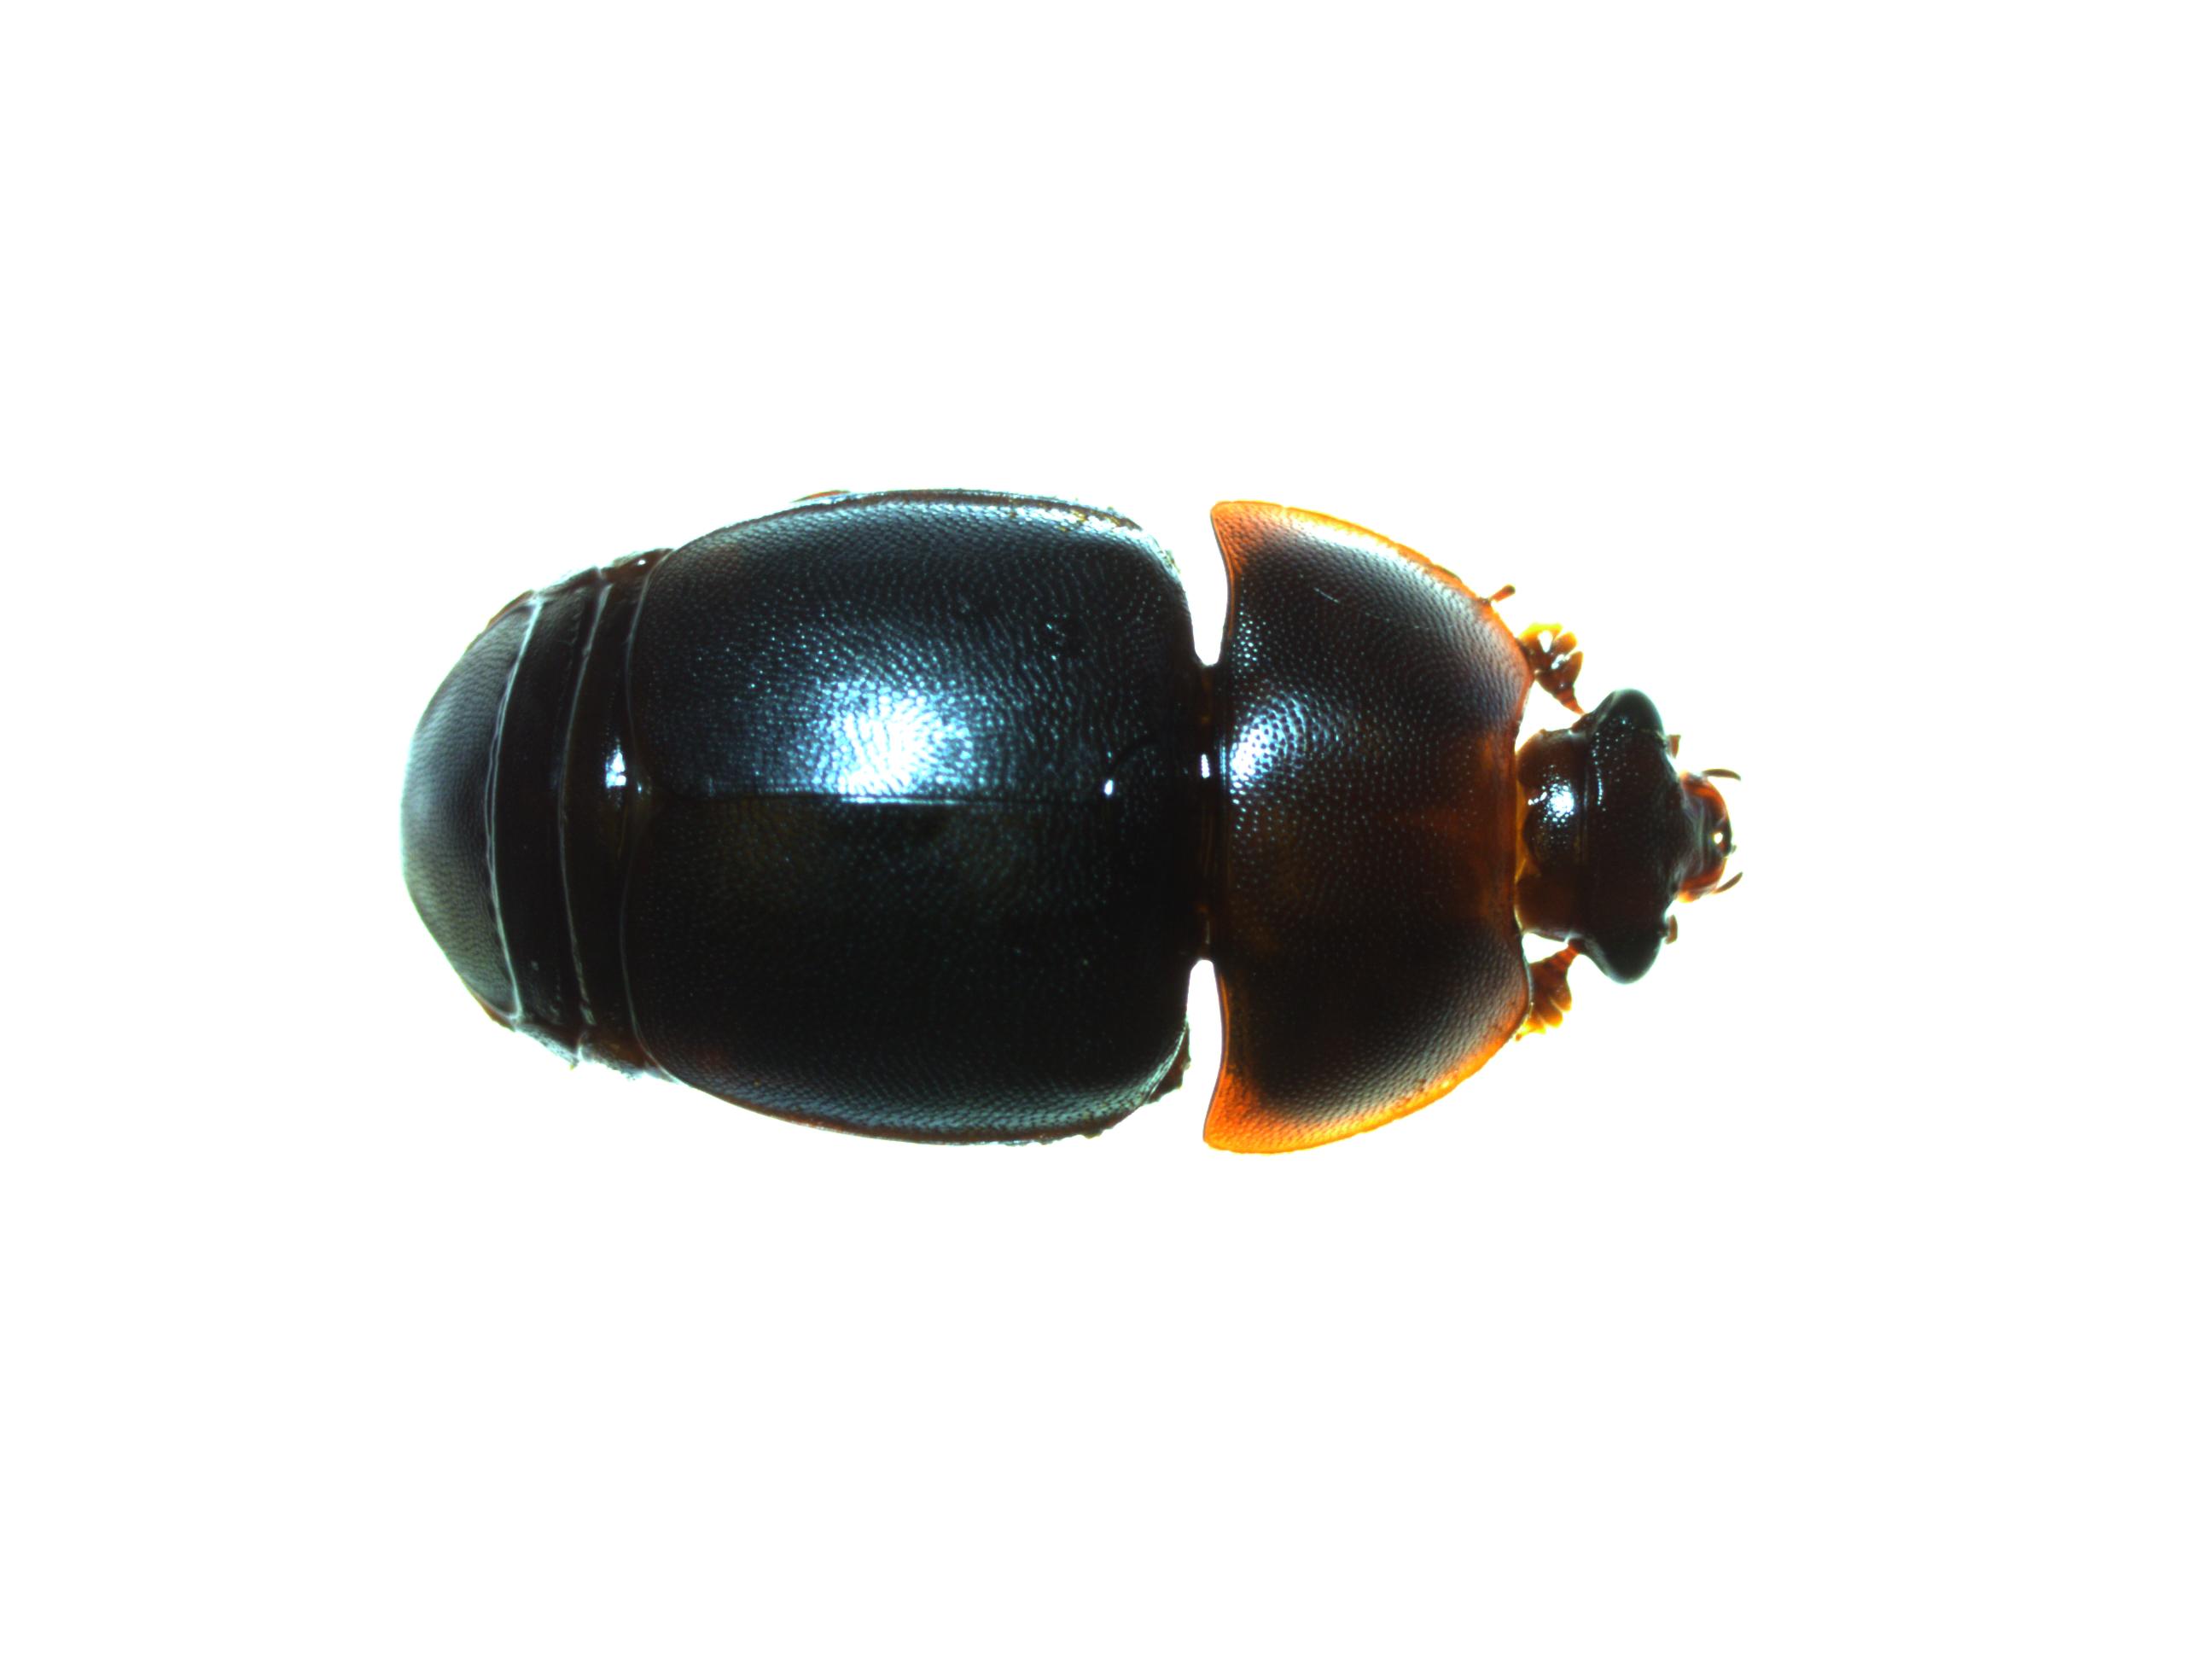 Adult small hive beetle